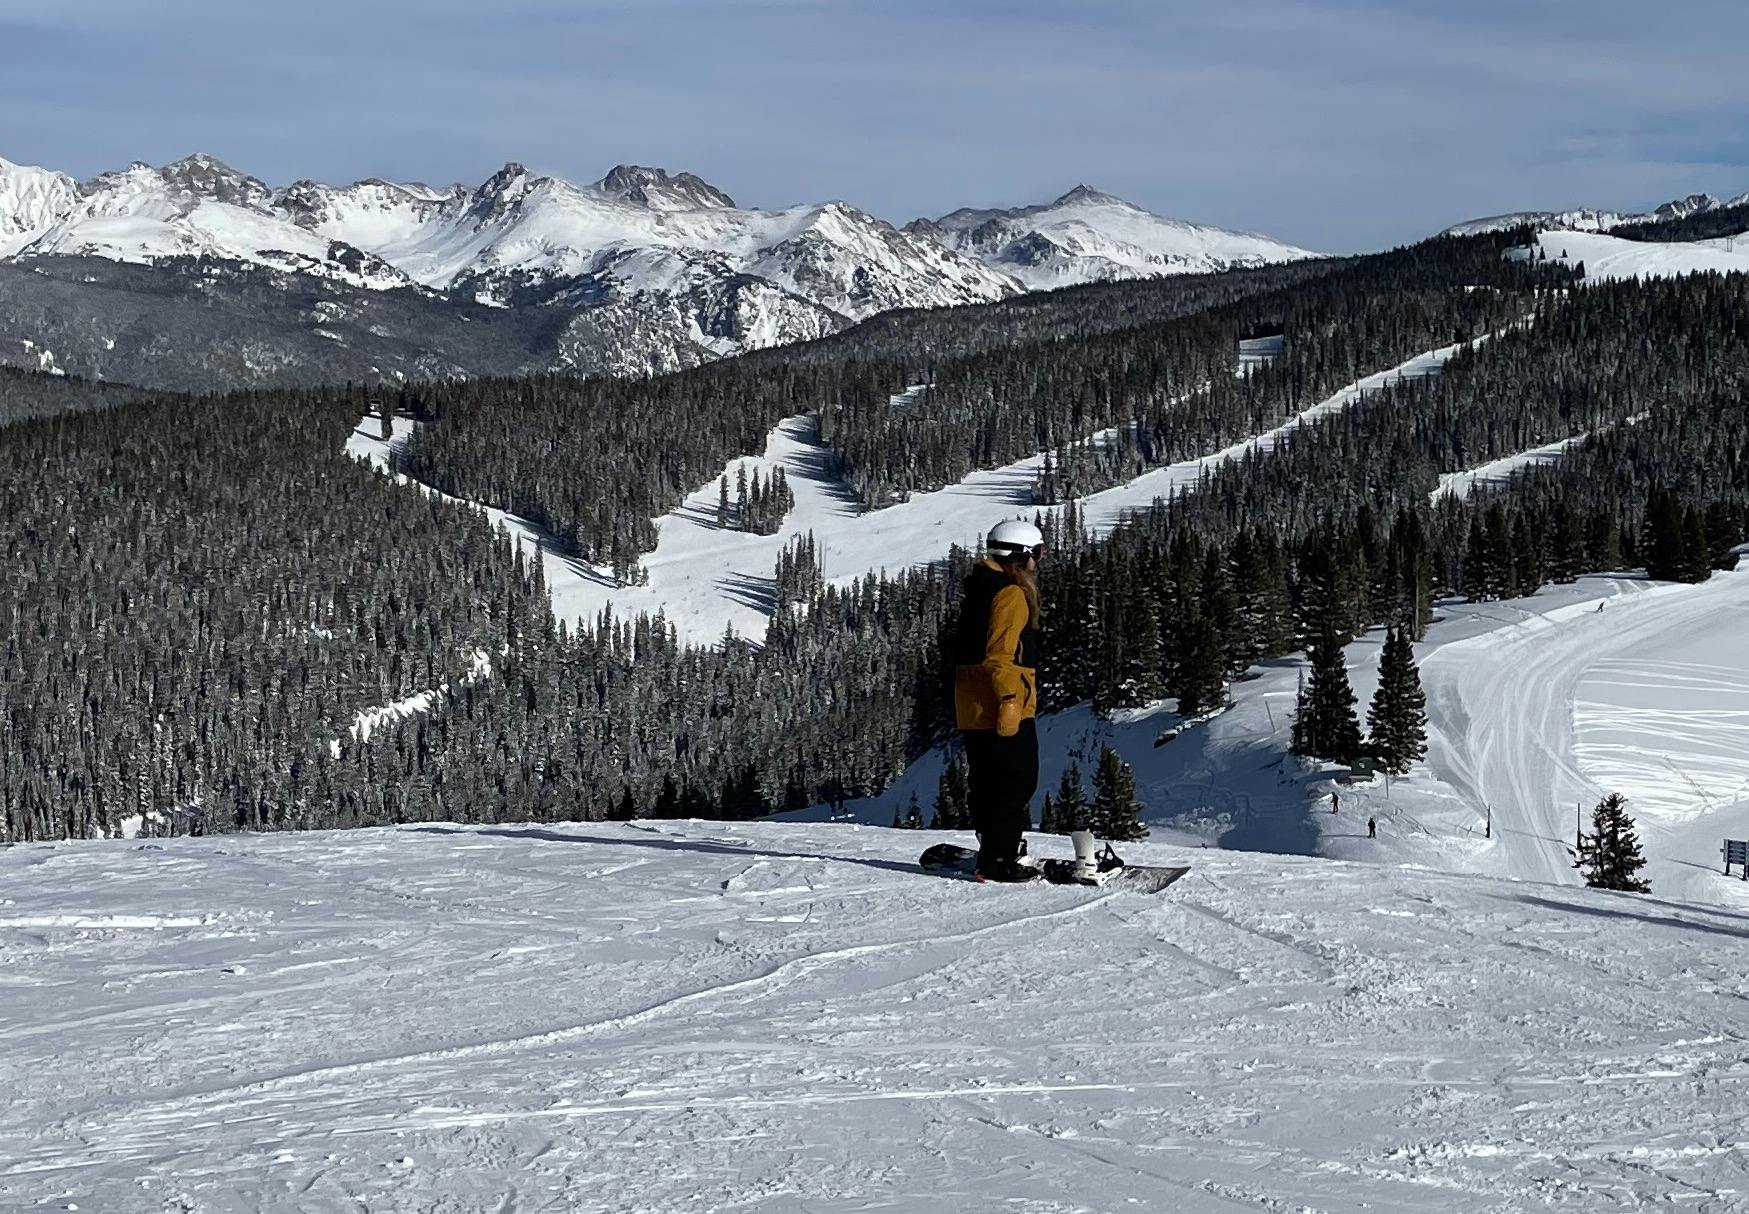 A man on a snowboard stands at the top of a ski run. There are mountains in the distance.